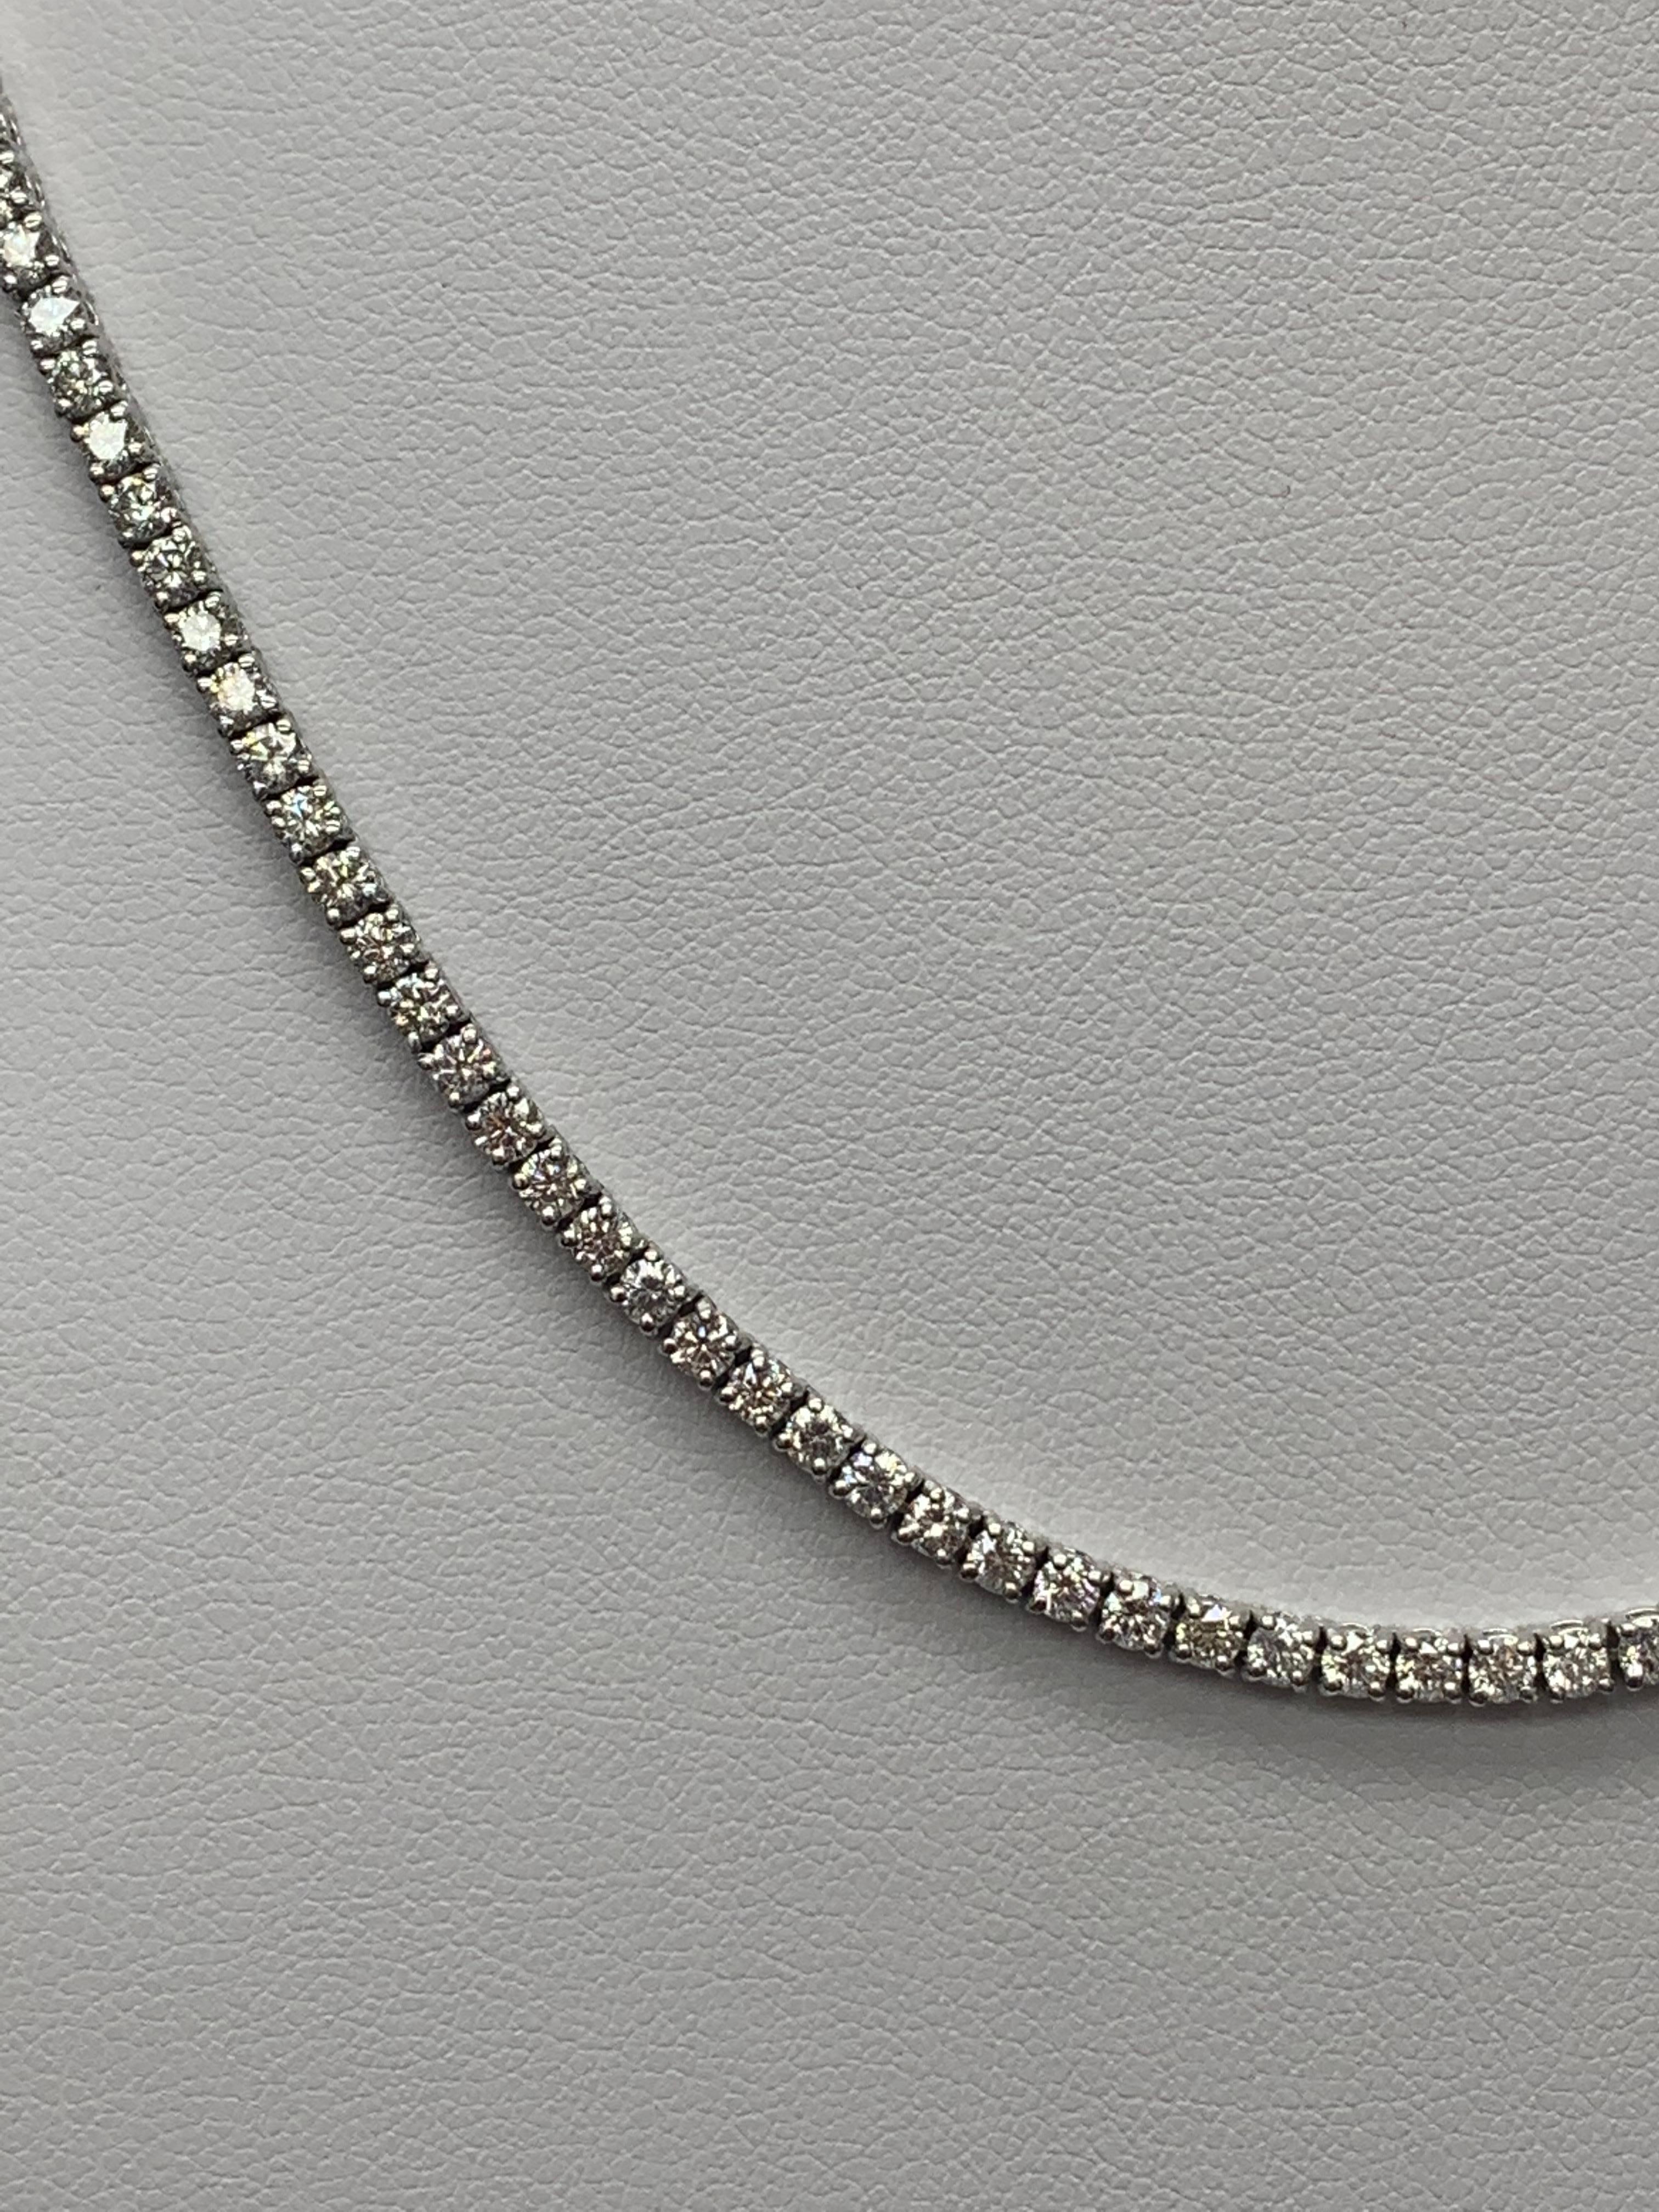 11.31 Carat Diamond Tennis Necklace in 14K White Gold In New Condition For Sale In NEW YORK, NY